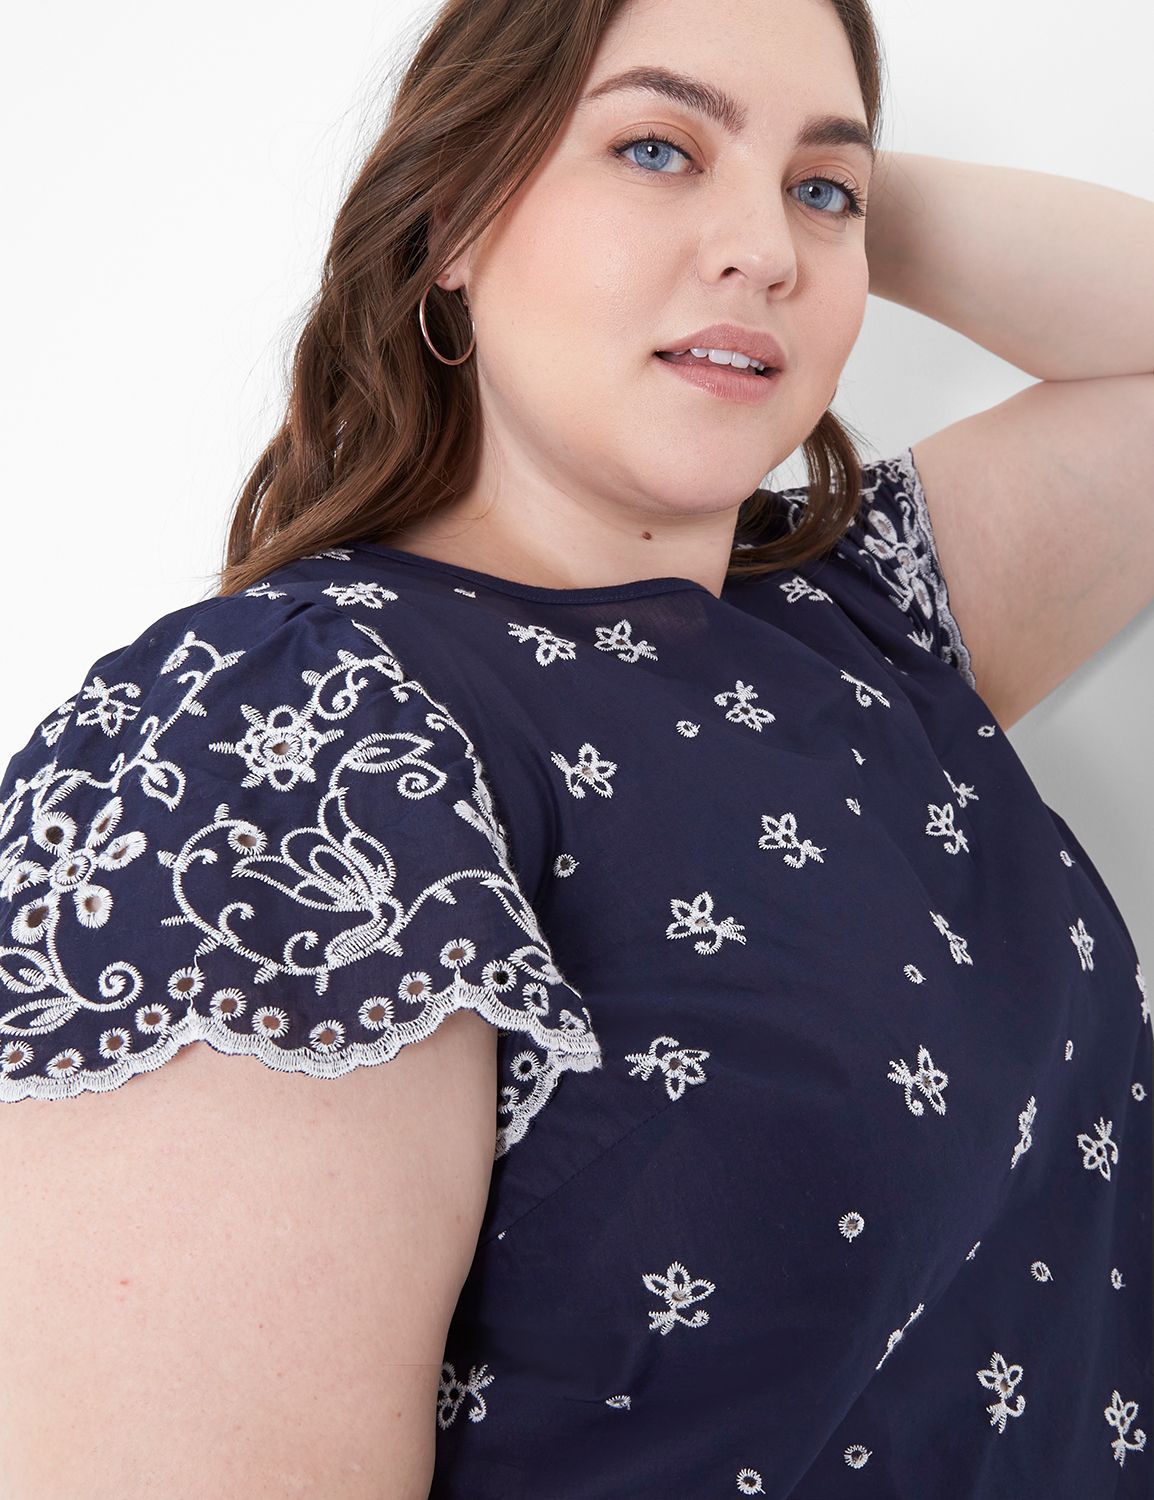 Lane Bryant: Save 40% on size-inclusive clothing for St. Patrick's Day